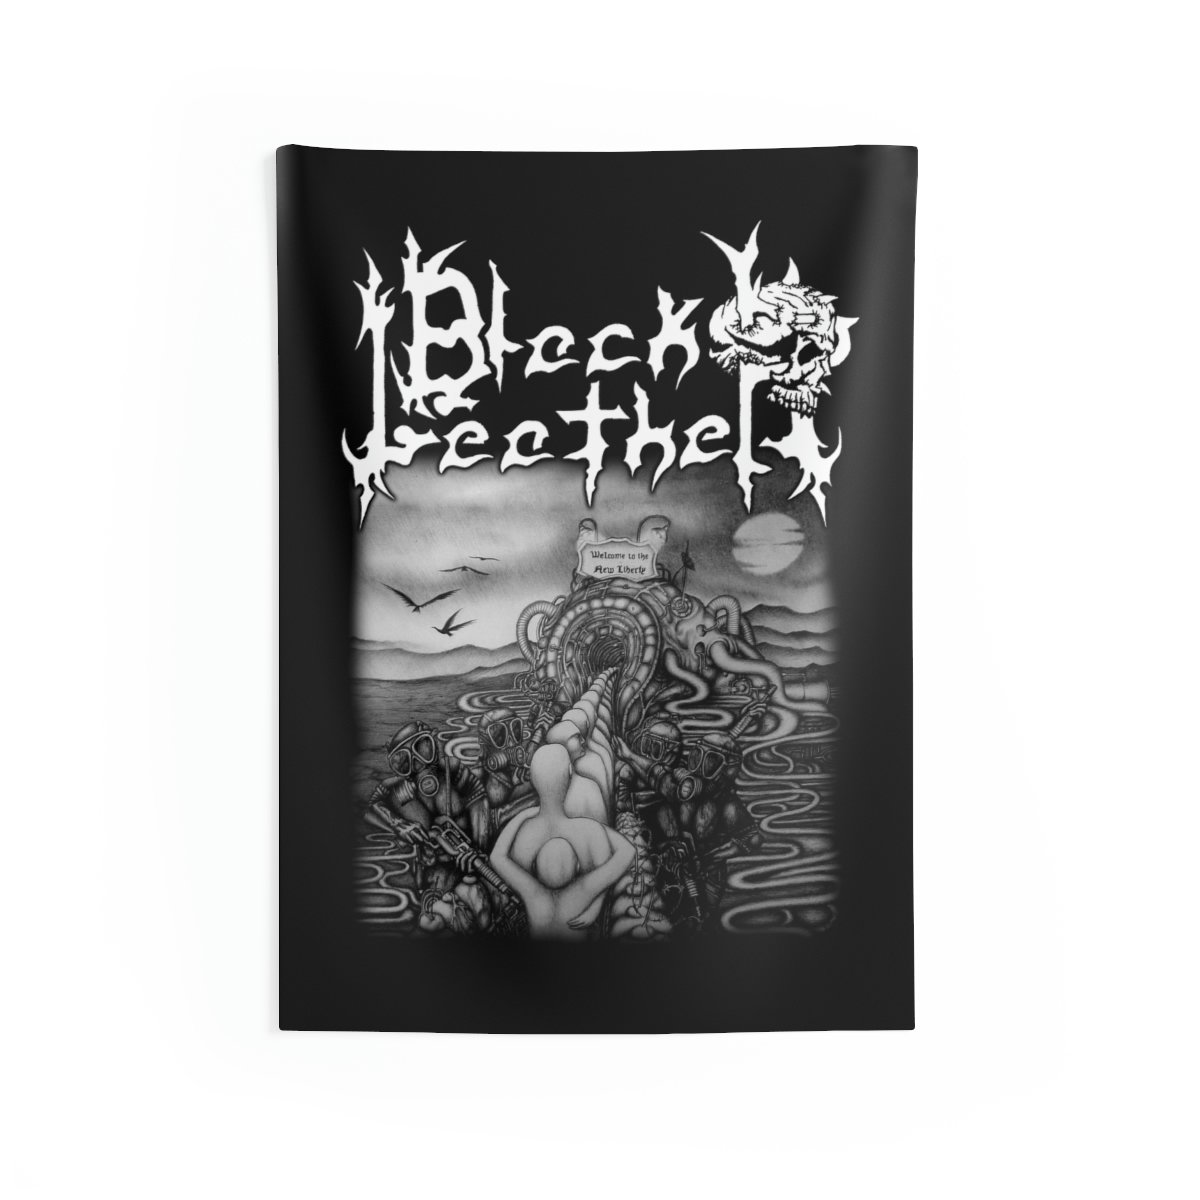 Black Leather – The New Liberty Indoor Wall Tapestries